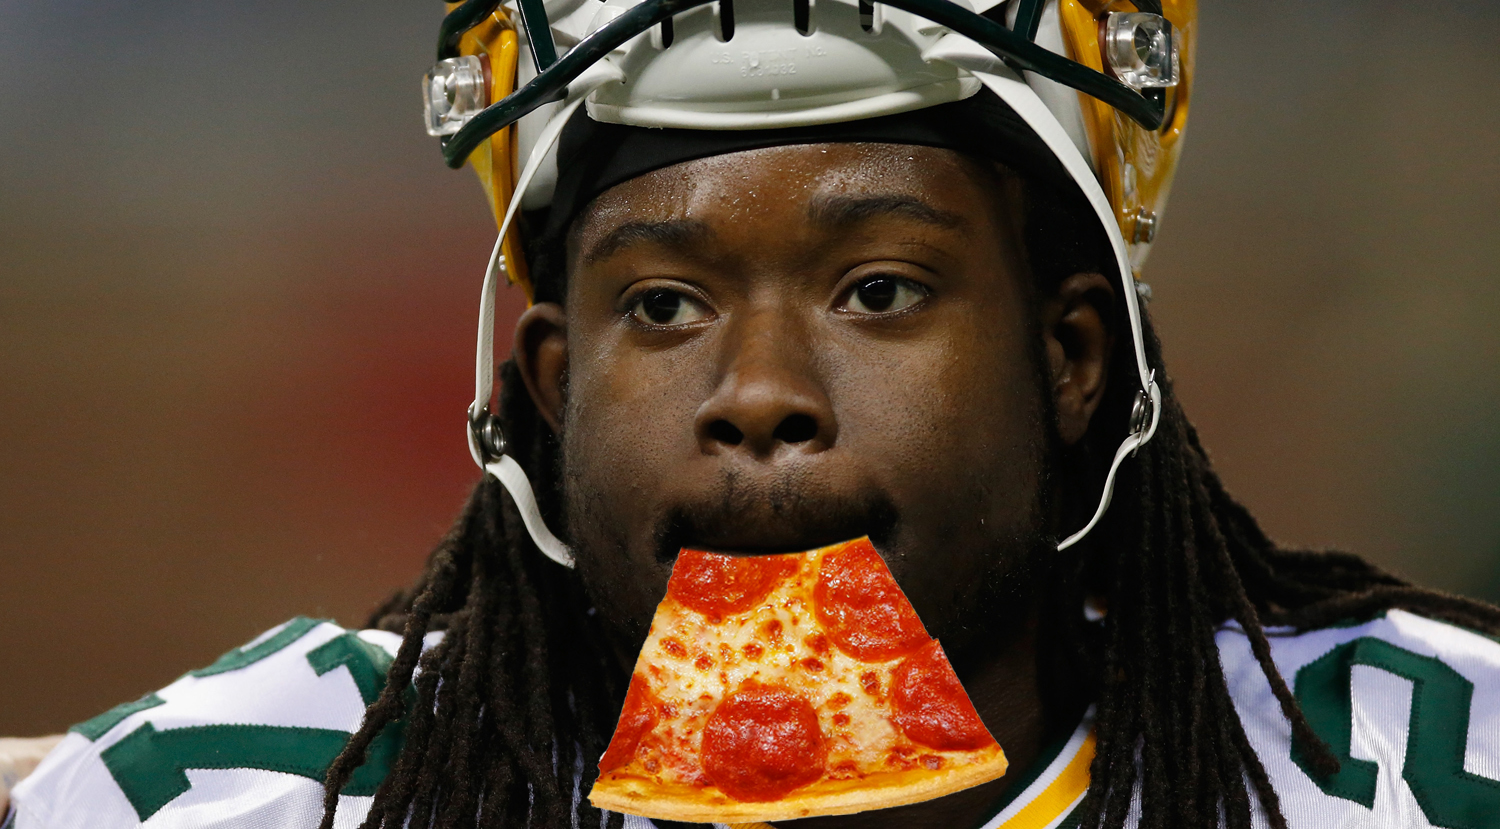 Does Eddie Lacy need a pizza to reach the end zone?